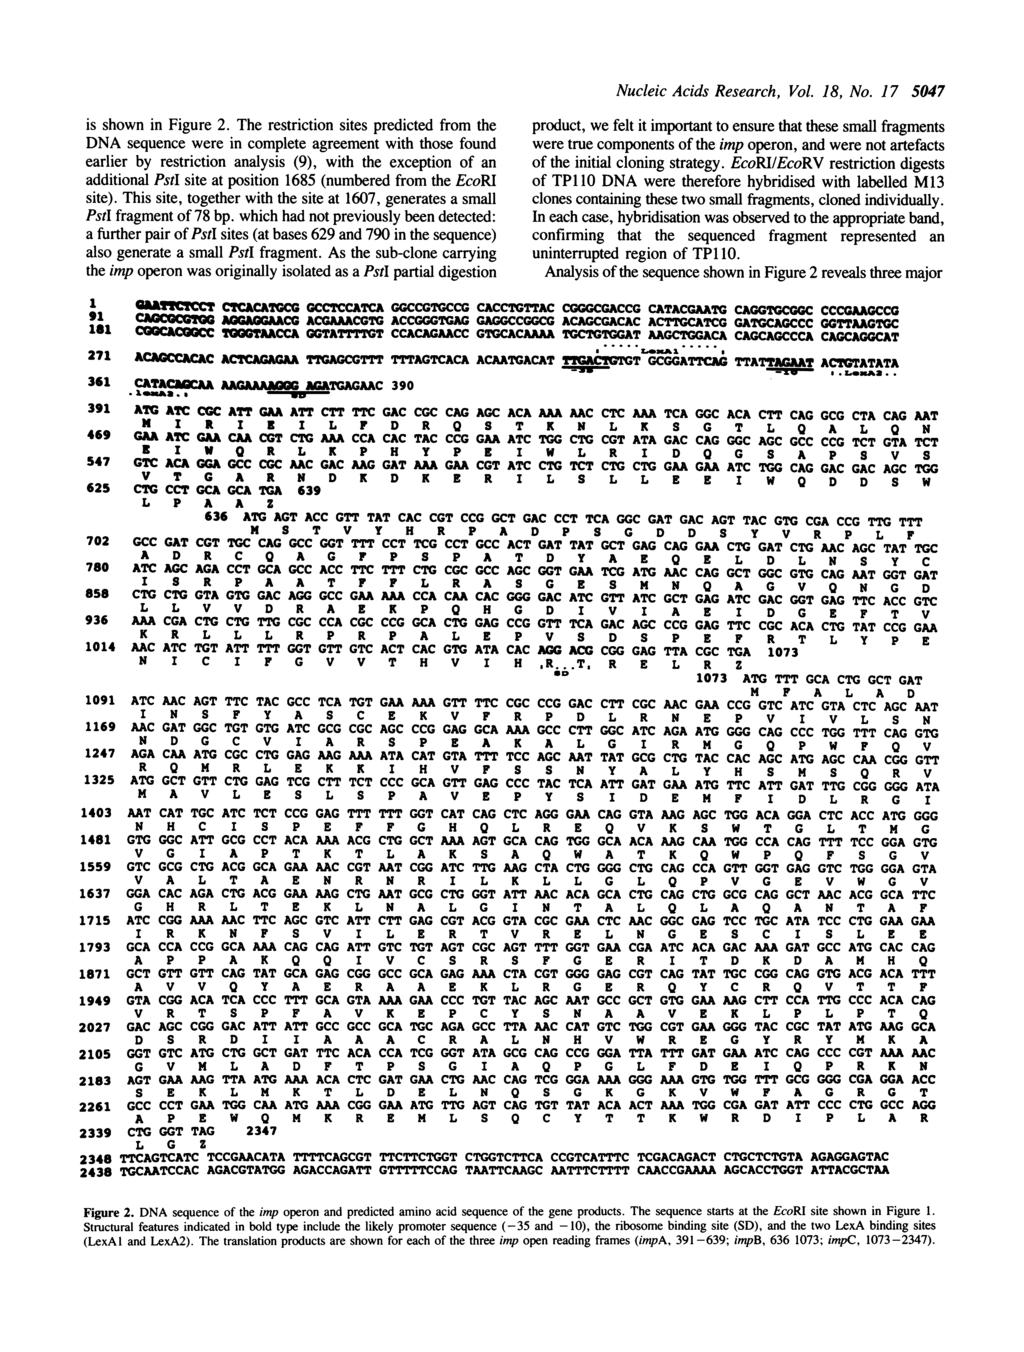 Nucleic Acids Research, Vol. 18, No. 17 5047 is shown in Figure 2.